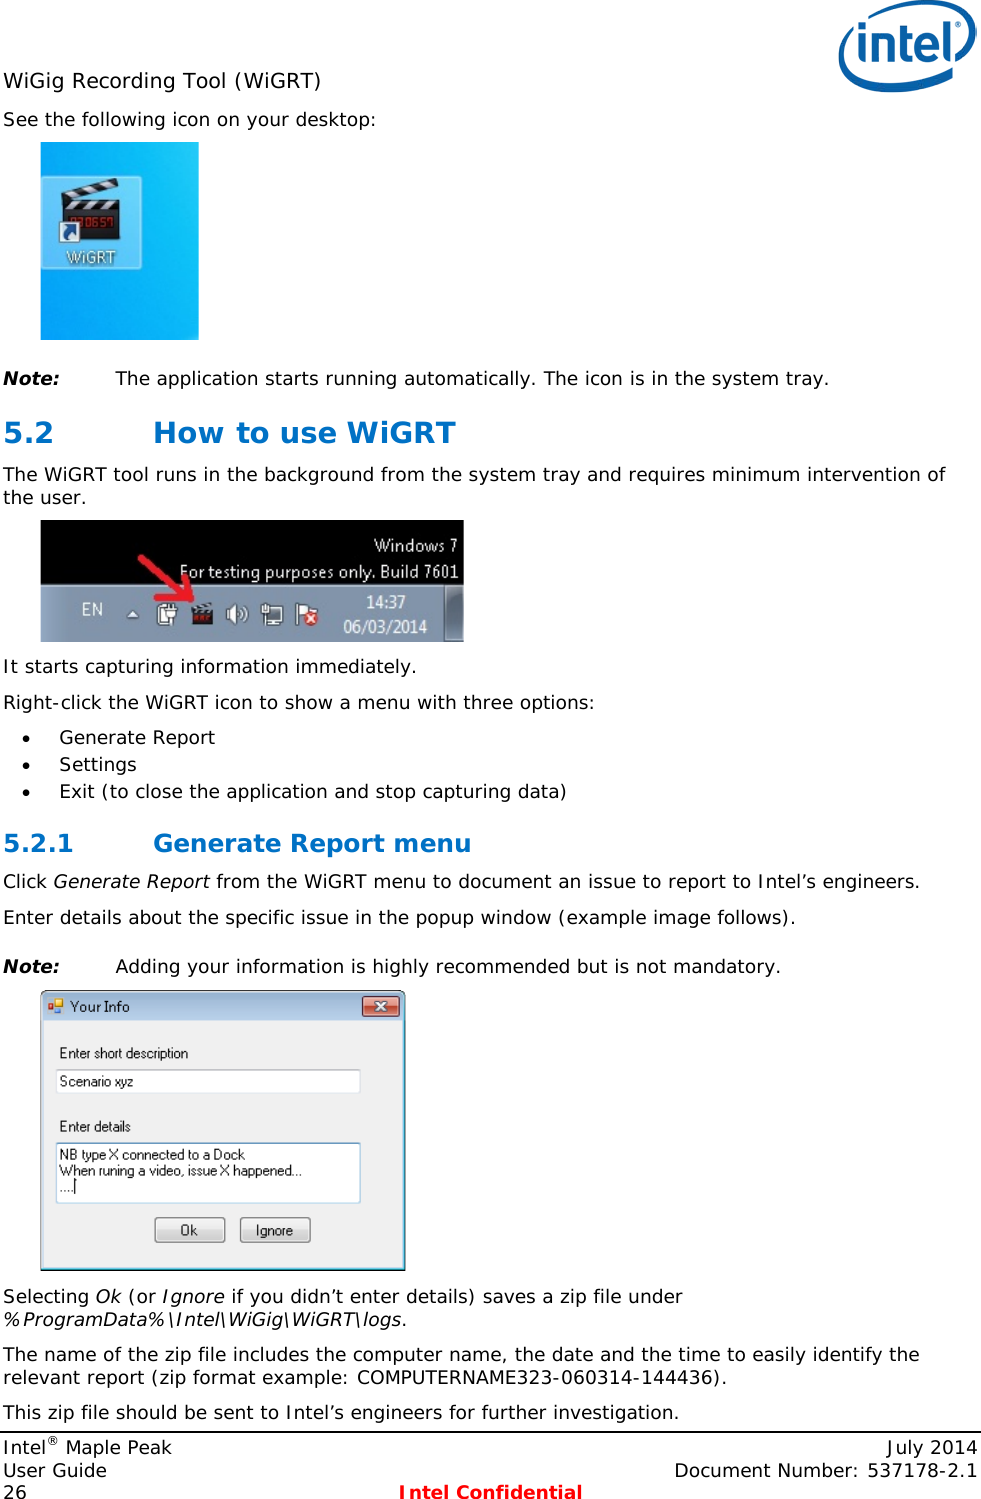 WiGig Recording Tool (WiGRT)   See the following icon on your desktop:  Note: The application starts running automatically. The icon is in the system tray. 5.2 How to use WiGRT  The WiGRT tool runs in the background from the system tray and requires minimum intervention of the user.  It starts capturing information immediately. Right-click the WiGRT icon to show a menu with three options:  • Generate Report • Settings • Exit (to close the application and stop capturing data) 5.2.1 Generate Report menu Click Generate Report from the WiGRT menu to document an issue to report to Intel’s engineers. Enter details about the specific issue in the popup window (example image follows).   Note: Adding your information is highly recommended but is not mandatory.   Selecting Ok (or Ignore if you didn’t enter details) saves a zip file under %ProgramData%\Intel\WiGig\WiGRT\logs. The name of the zip file includes the computer name, the date and the time to easily identify the relevant report (zip format example: COMPUTERNAME323-060314-144436). This zip file should be sent to Intel’s engineers for further investigation. Intel® Maple Peak    July 2014 User Guide    Document Number: 537178-2.1 26  Intel Confidential   